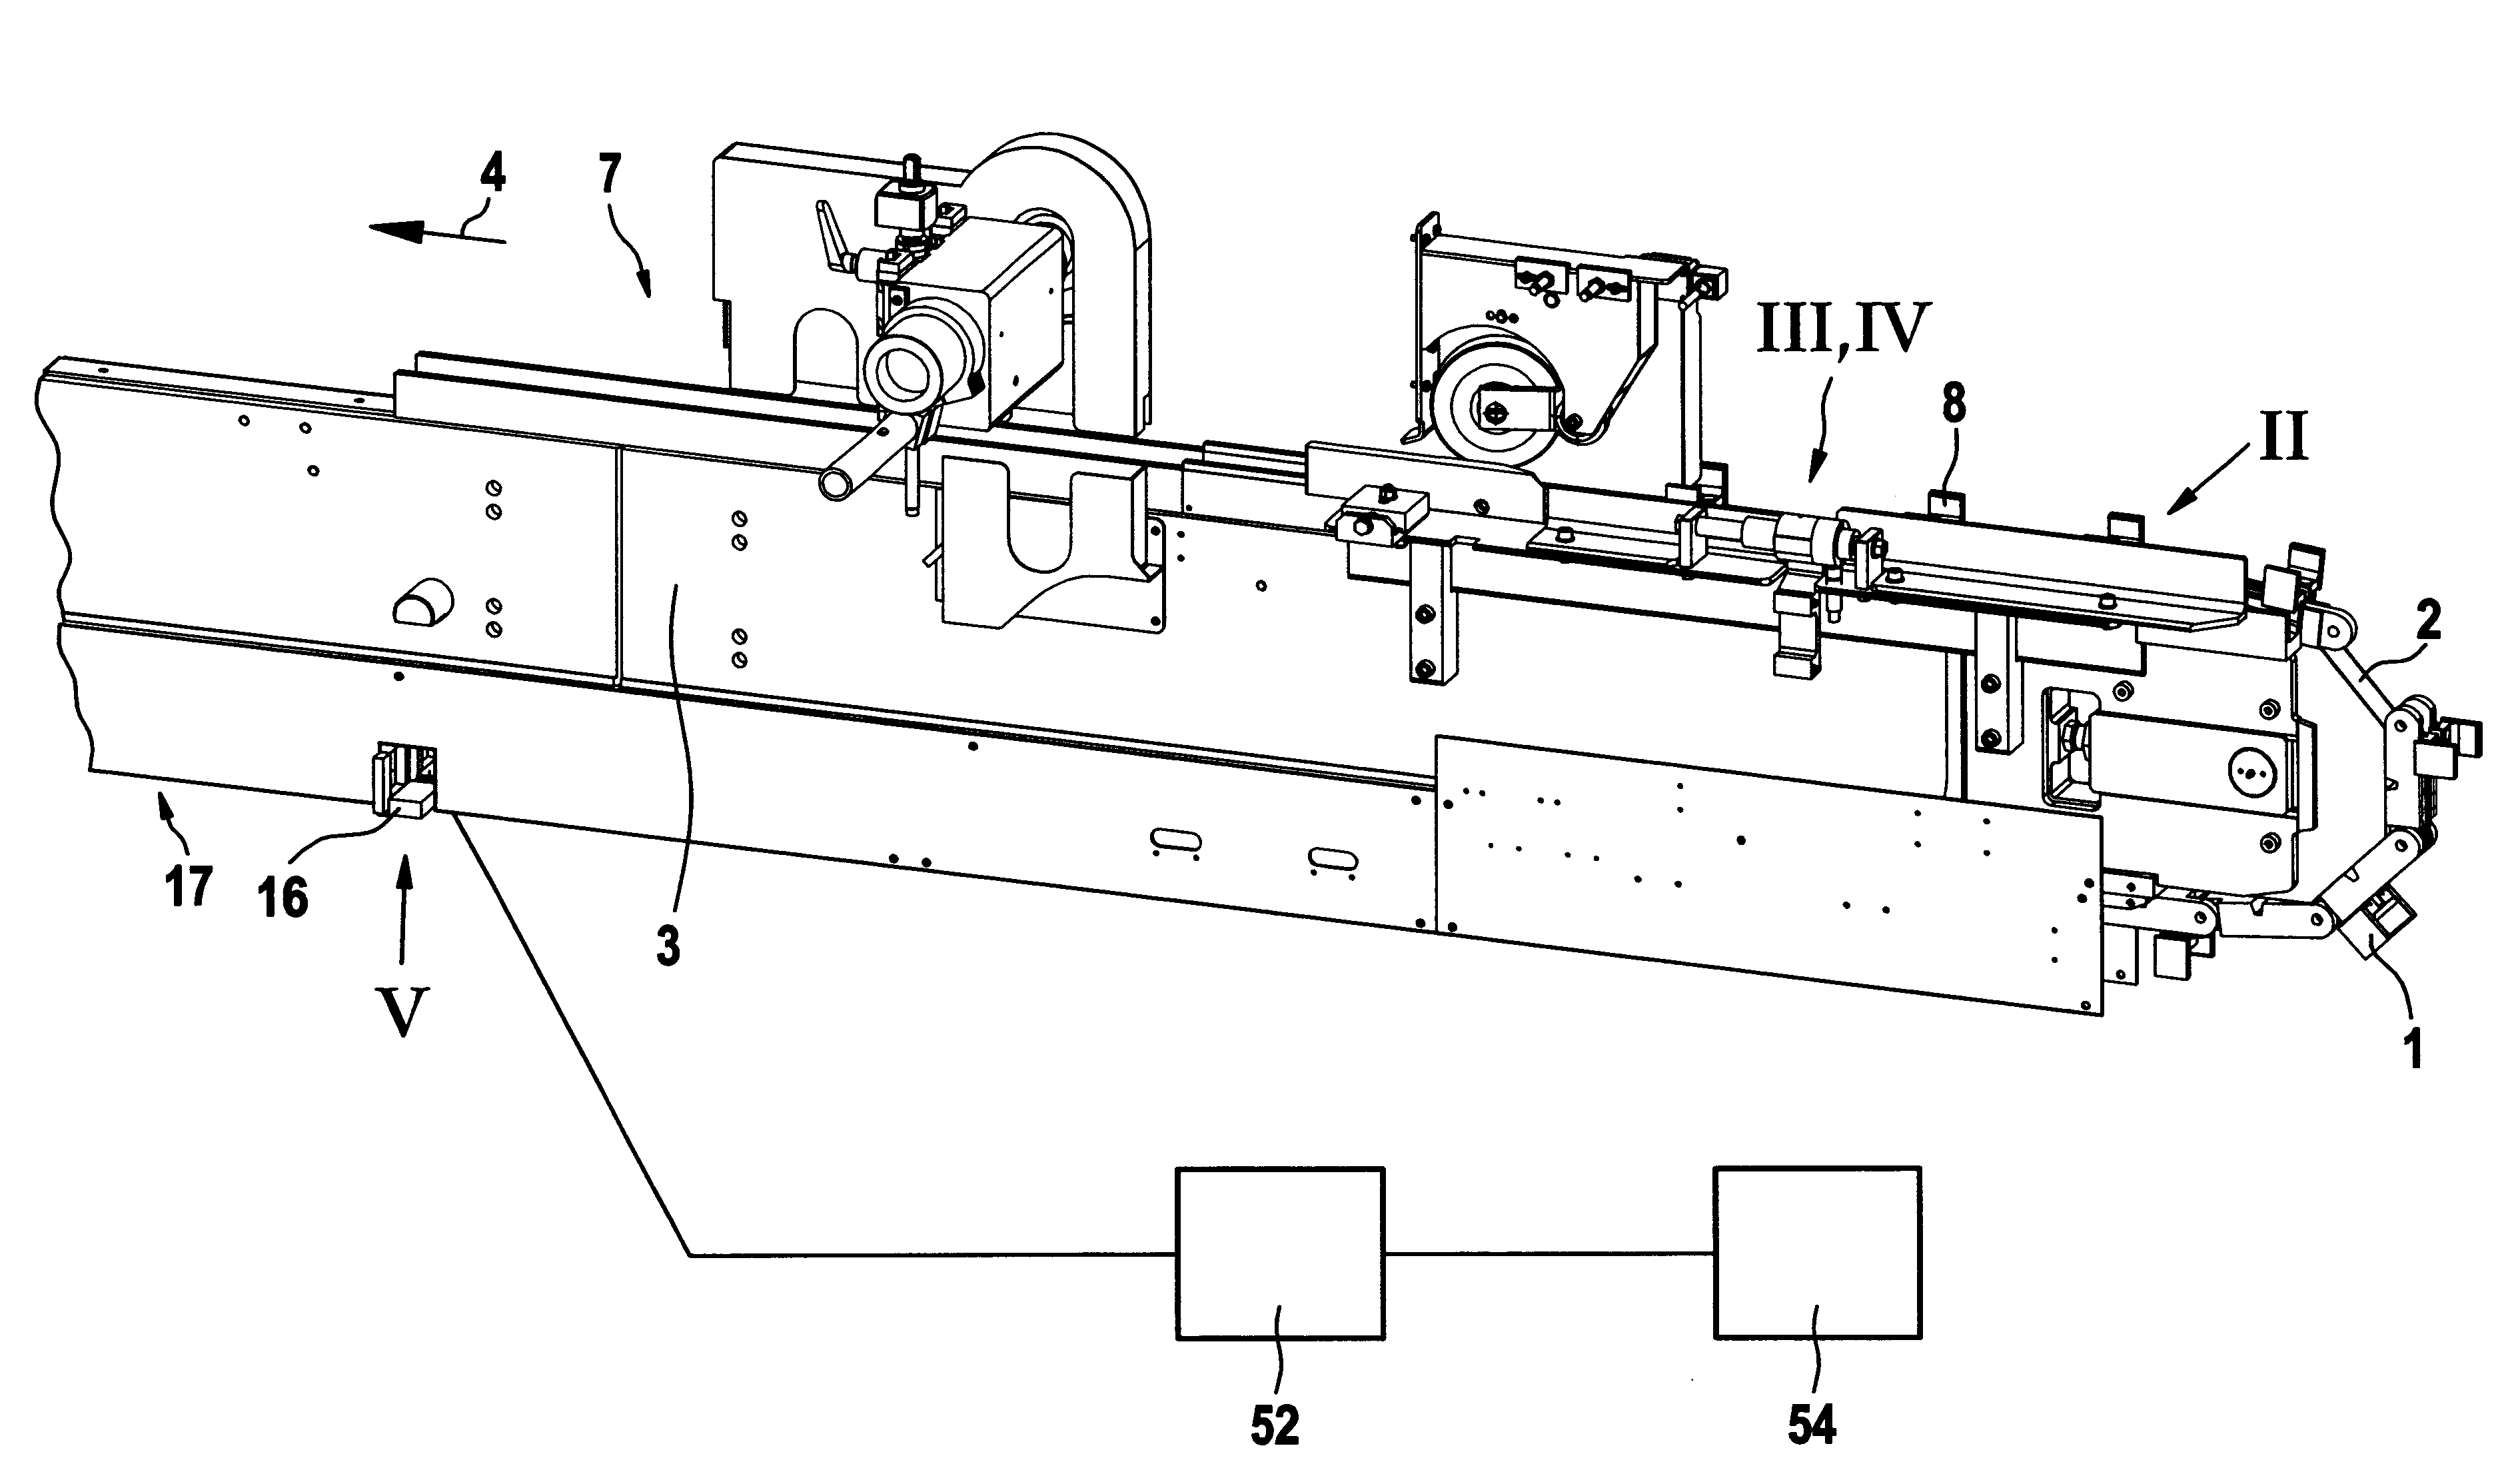 Aligning and feeding device for panel-shaped workpieces